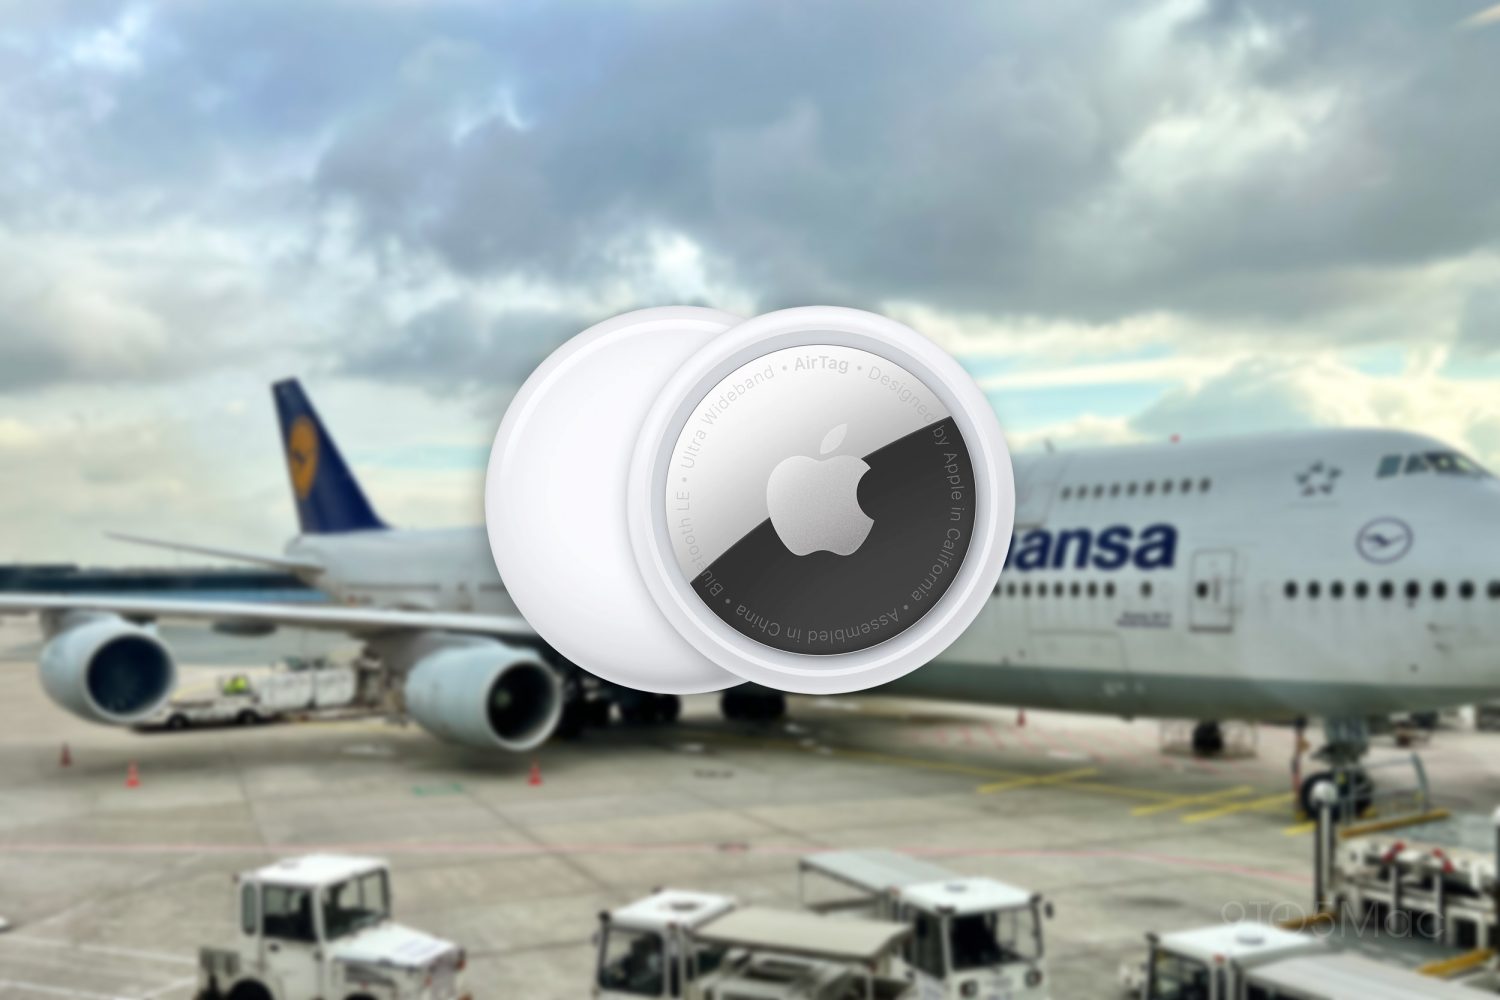 Lufthansa says it is not banning AirTags from its flights despite tweets claiming otherwise